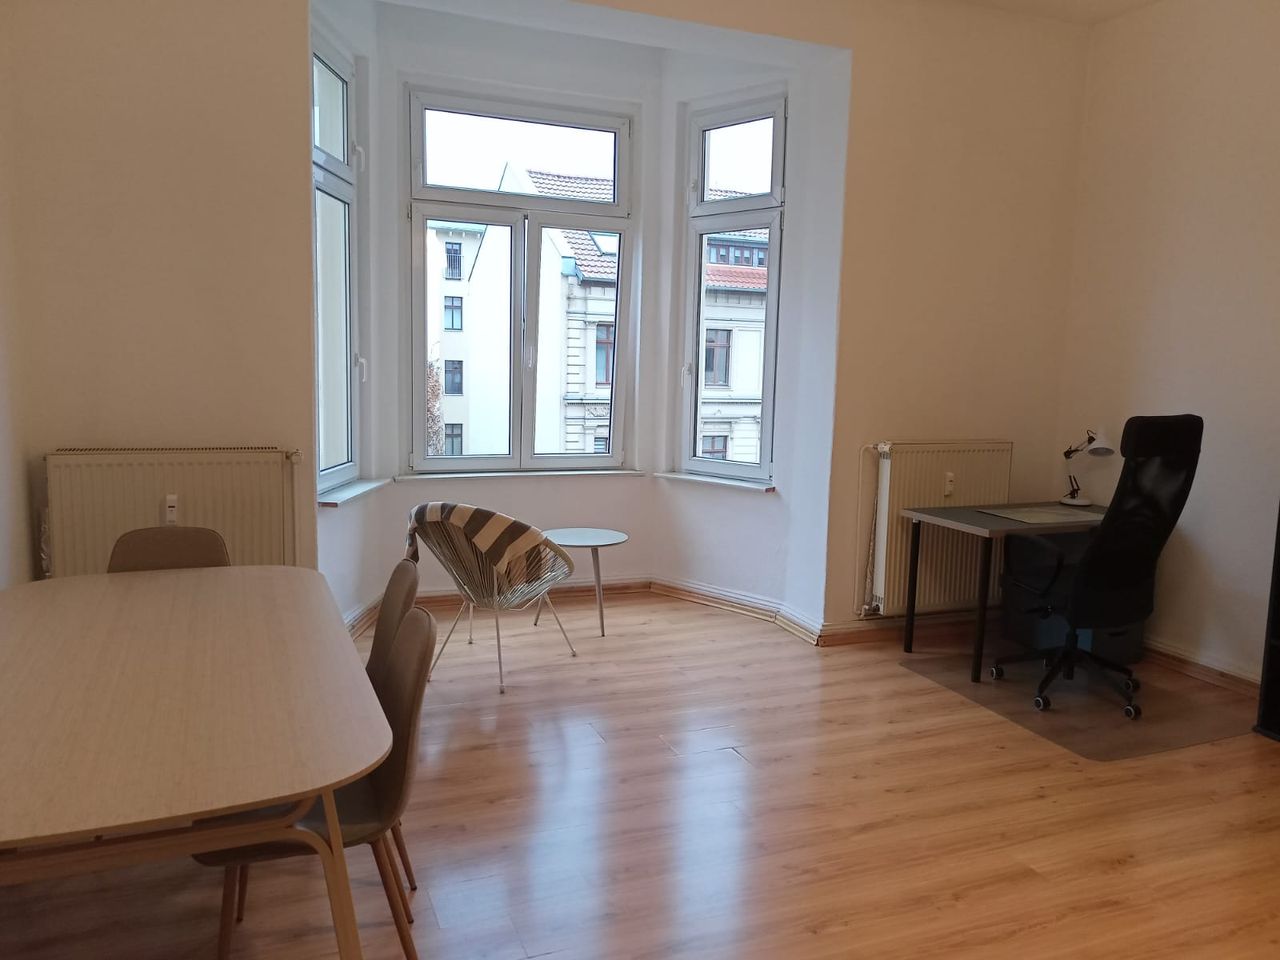 Representative and bright apartment in the heart of Magdeburg